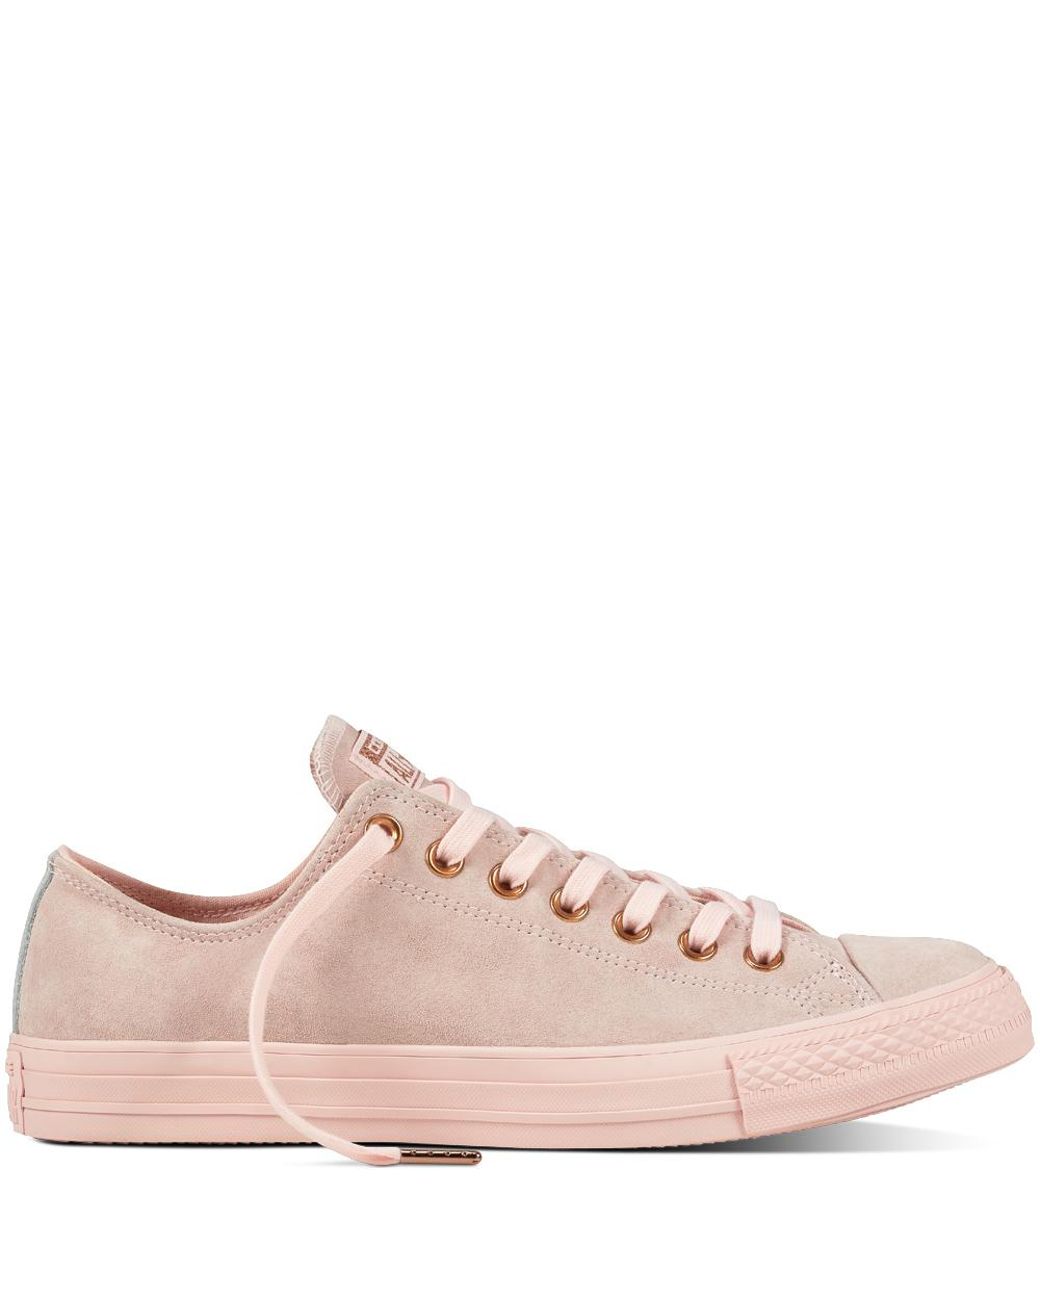 Converse Chuck Taylor All Star Suede in Pink | Lyst UK